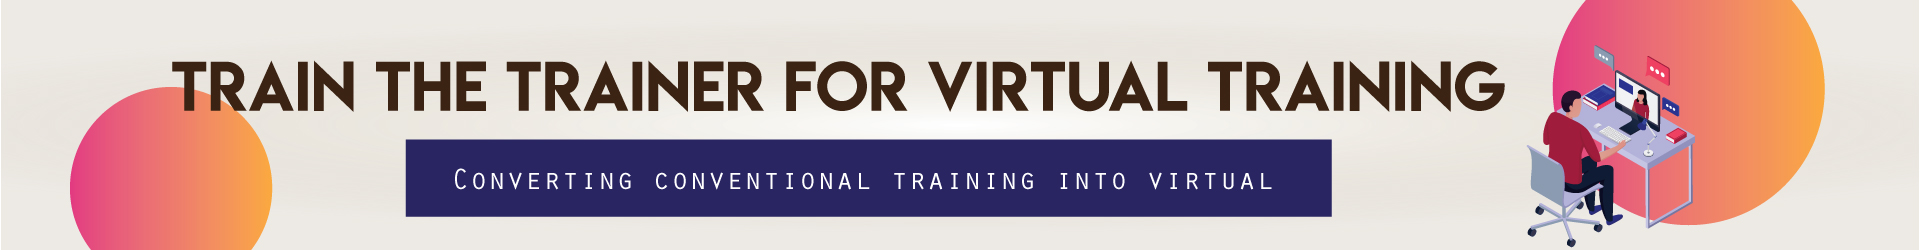 train the trainer for virtual training